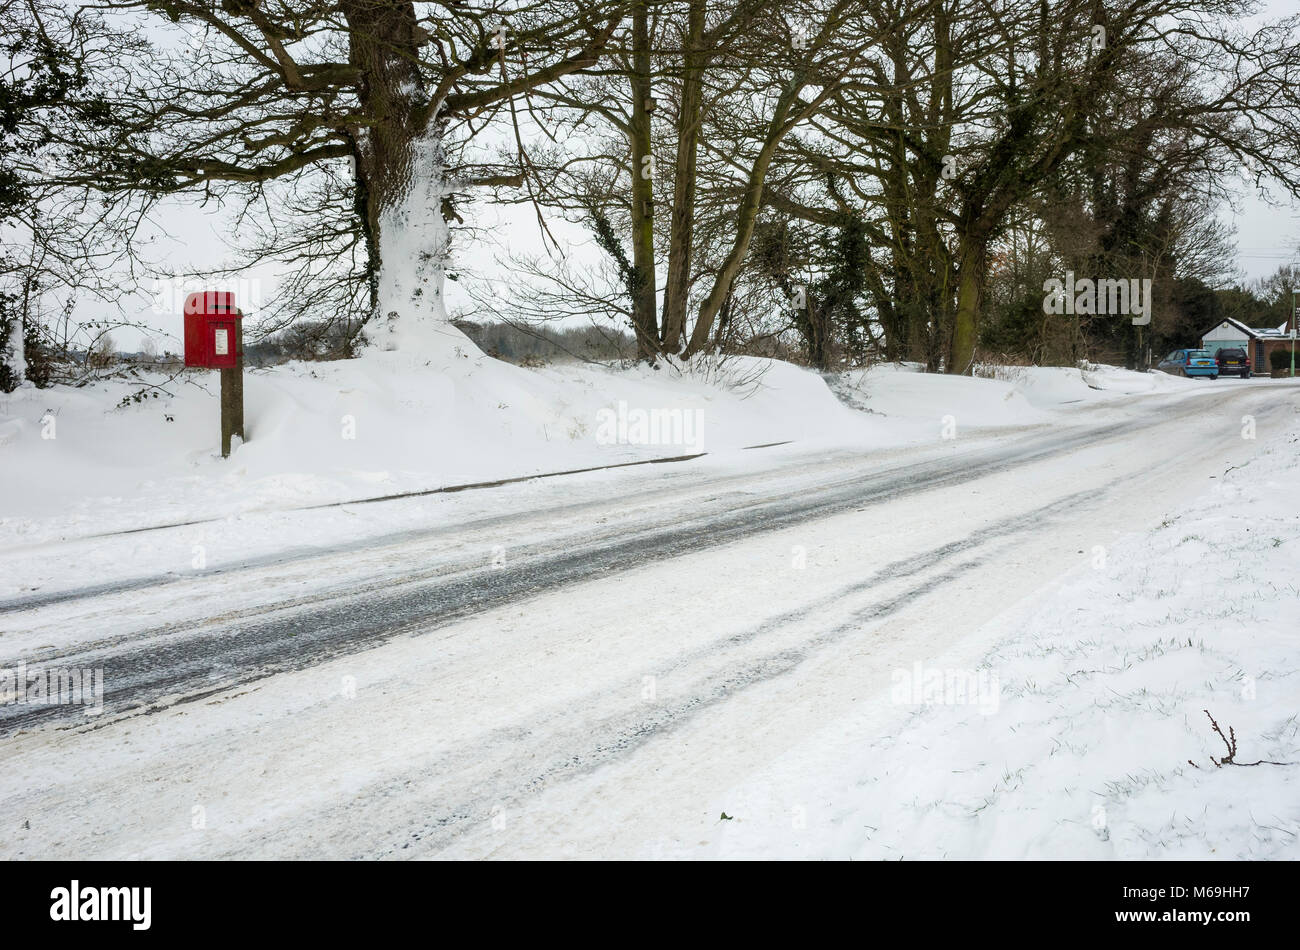 Ipswich, England. 1st March 2018.  A secluded Royal Mail postbox on side of a snow laden road following 'The Beast From The East' storm.  Snow drifts have completely blocked the path up to the road side, with snow built-up in excess of 30cm high.  Tire tracks from passing traffic can be seen along the road.  Photographed with a Ricoh GRII camera. Stock Photo